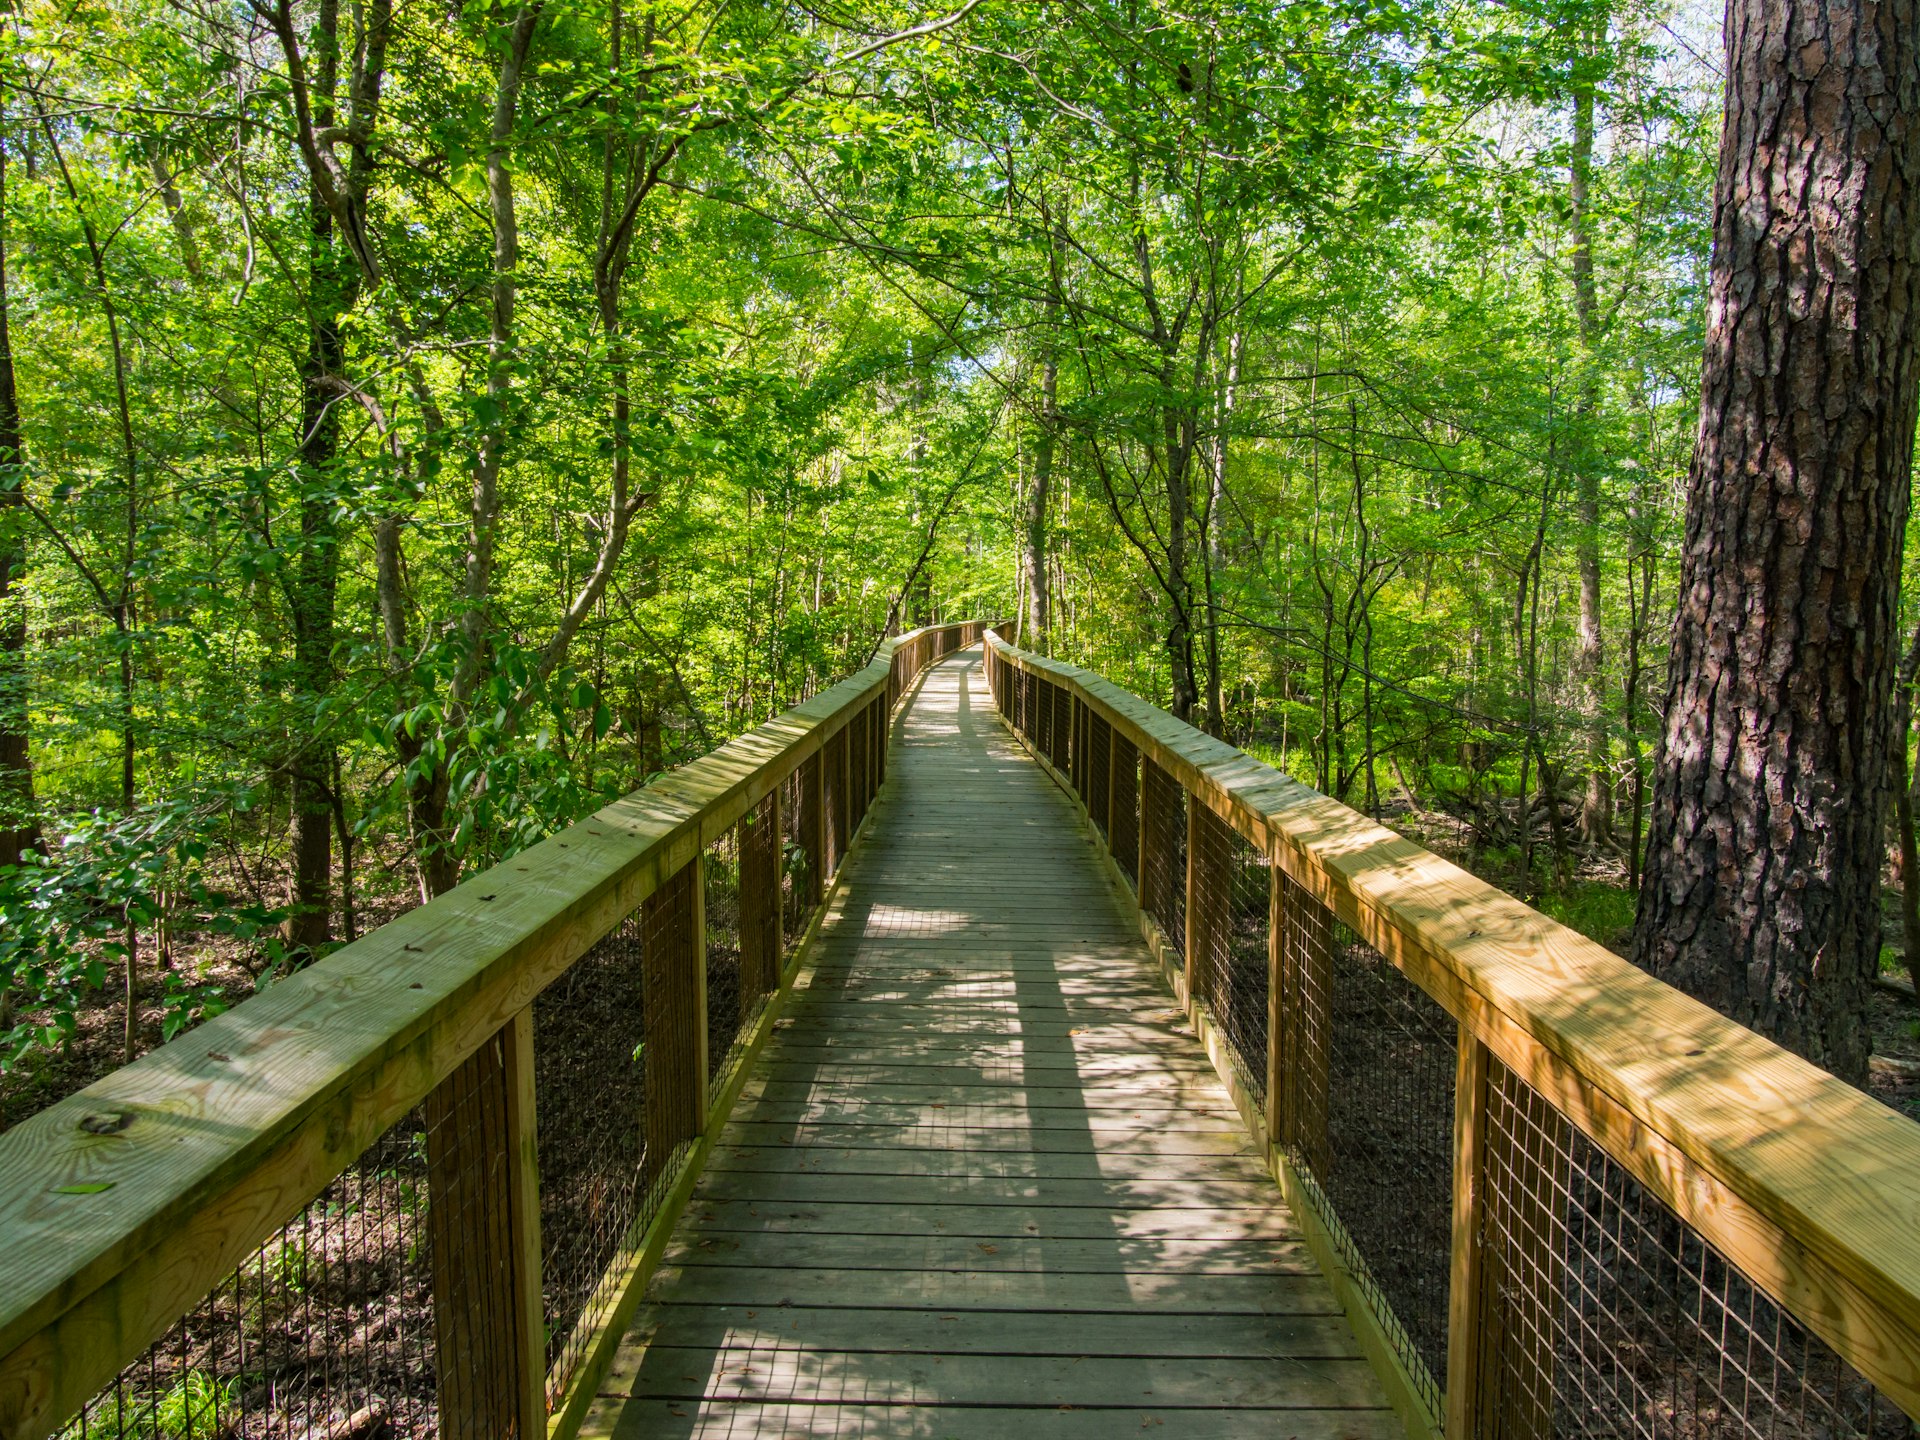 A boardwalk leads through the forest of Congaree National Park, South Carolina, USA